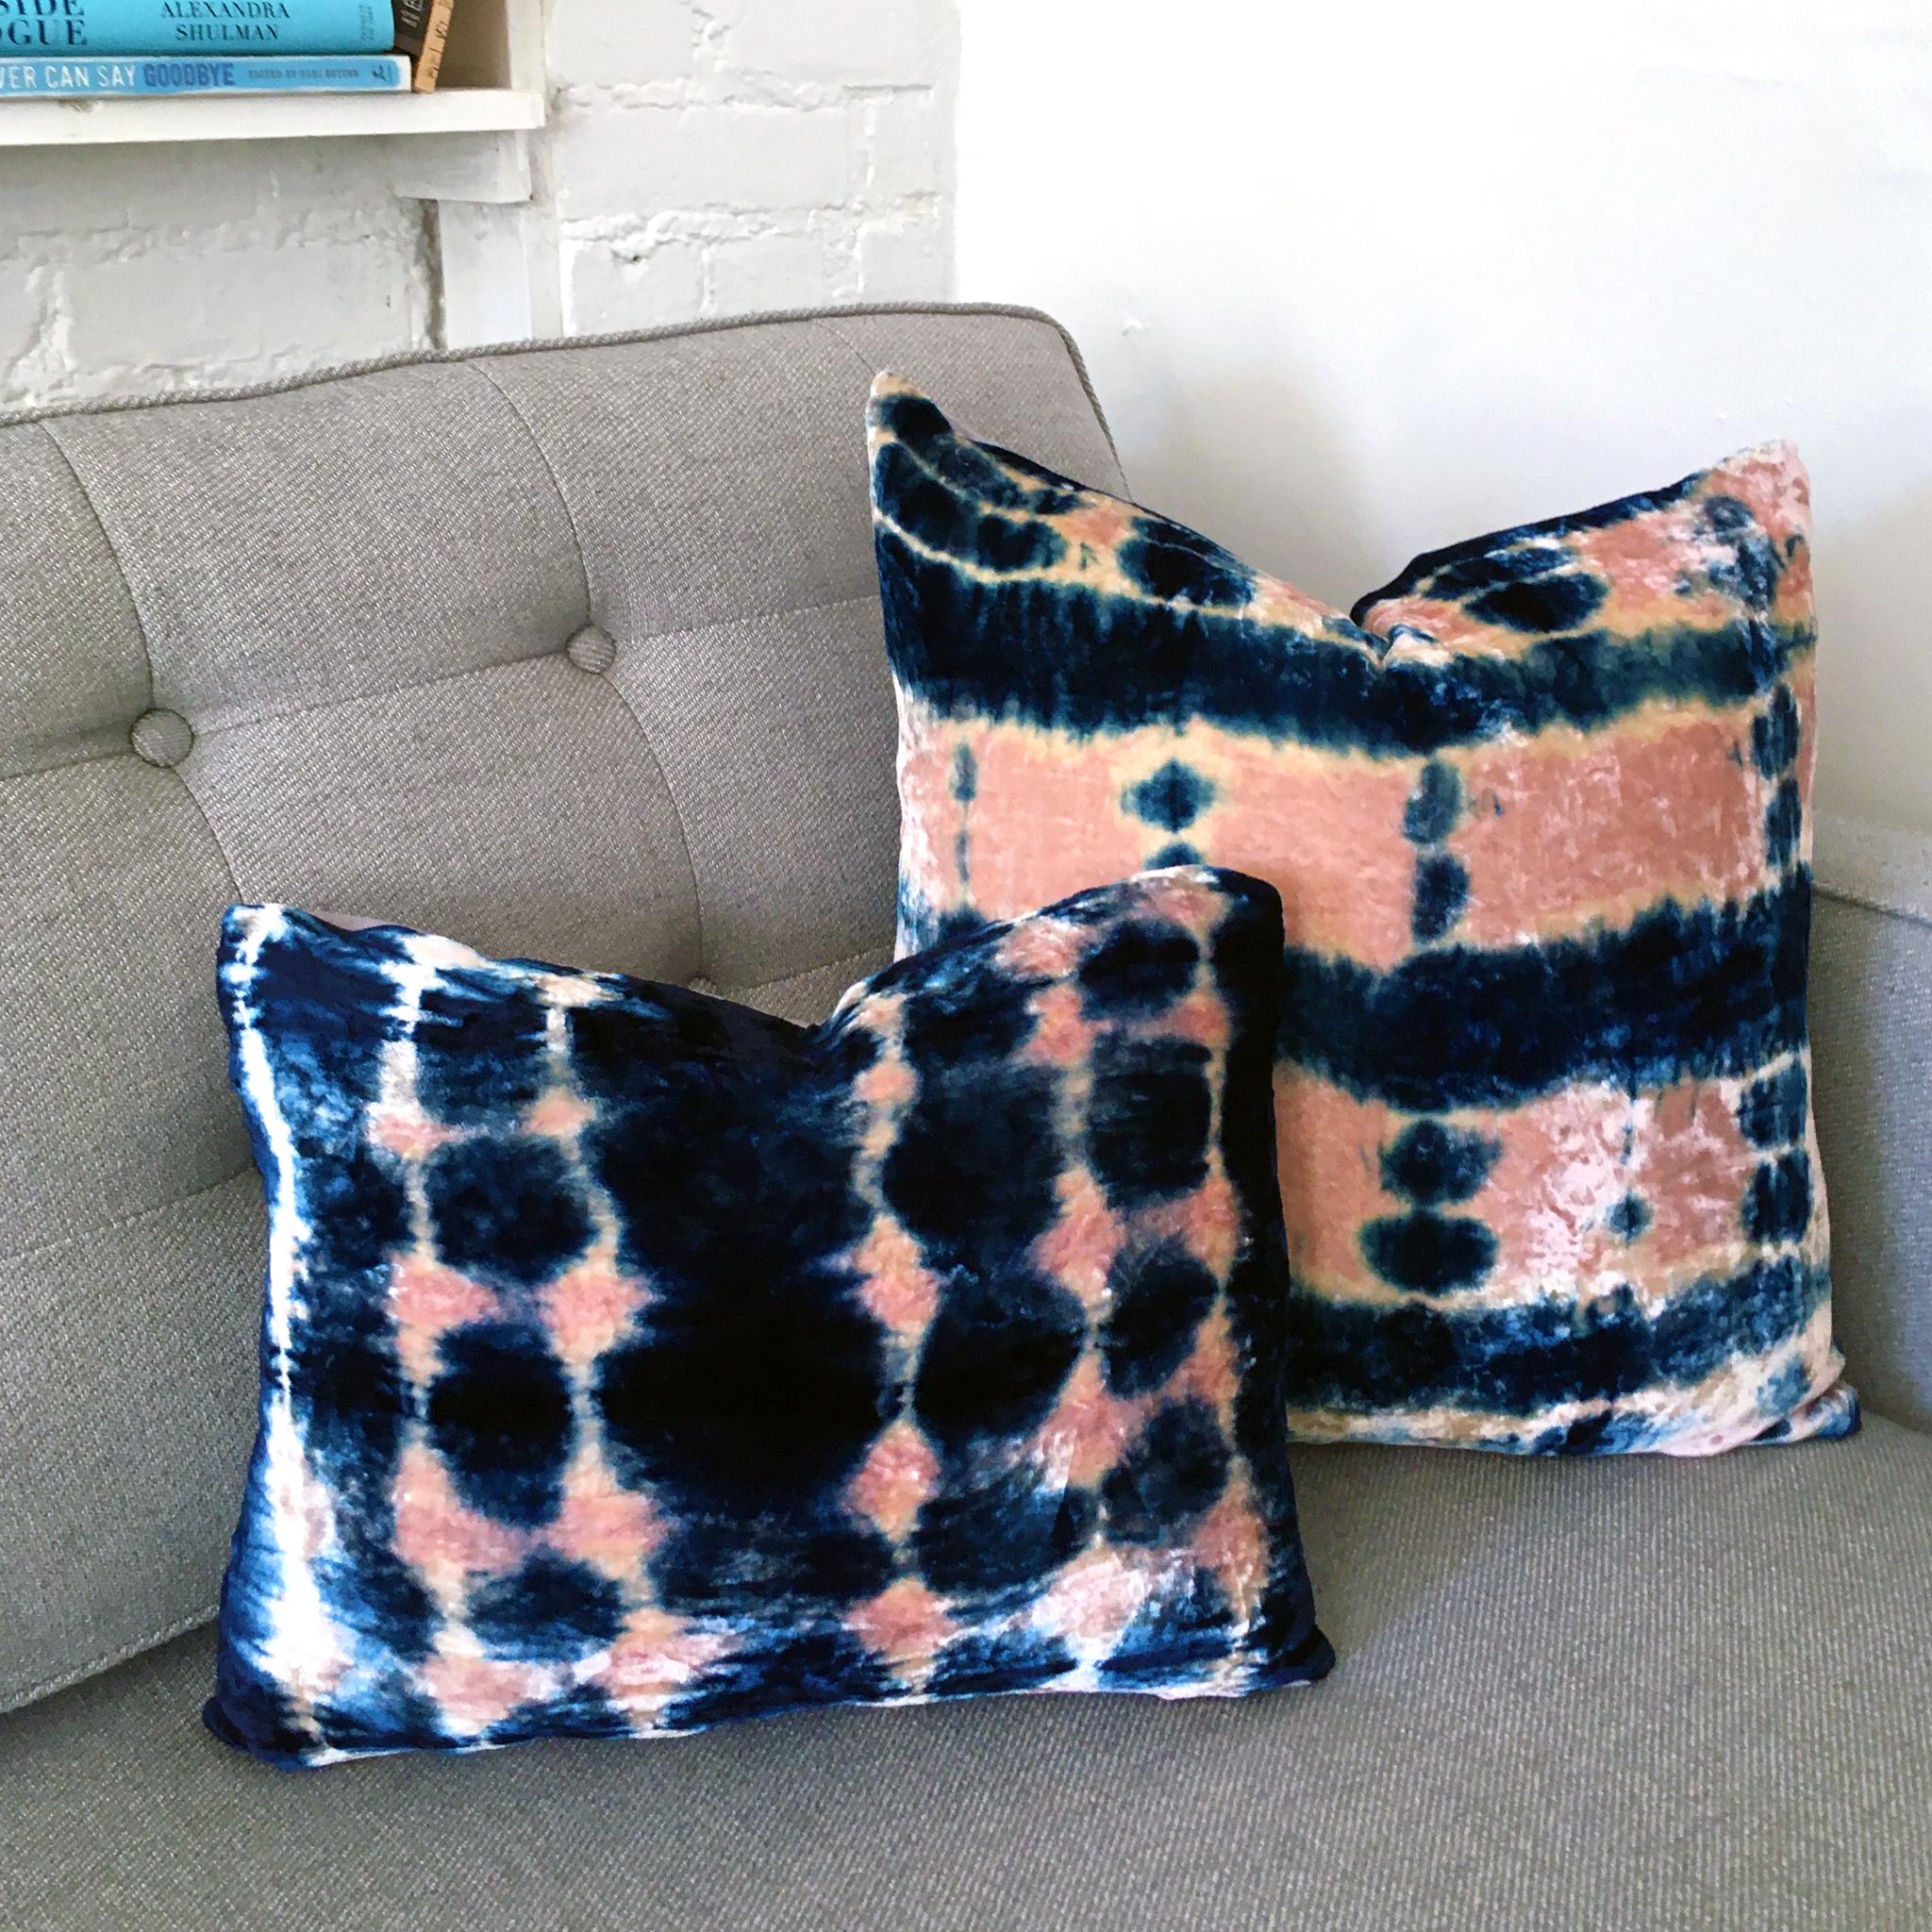 Dyed Hand-dyed Velvet Throw Pillow in Rose Pink & Indigo Blue Pleat Pattern